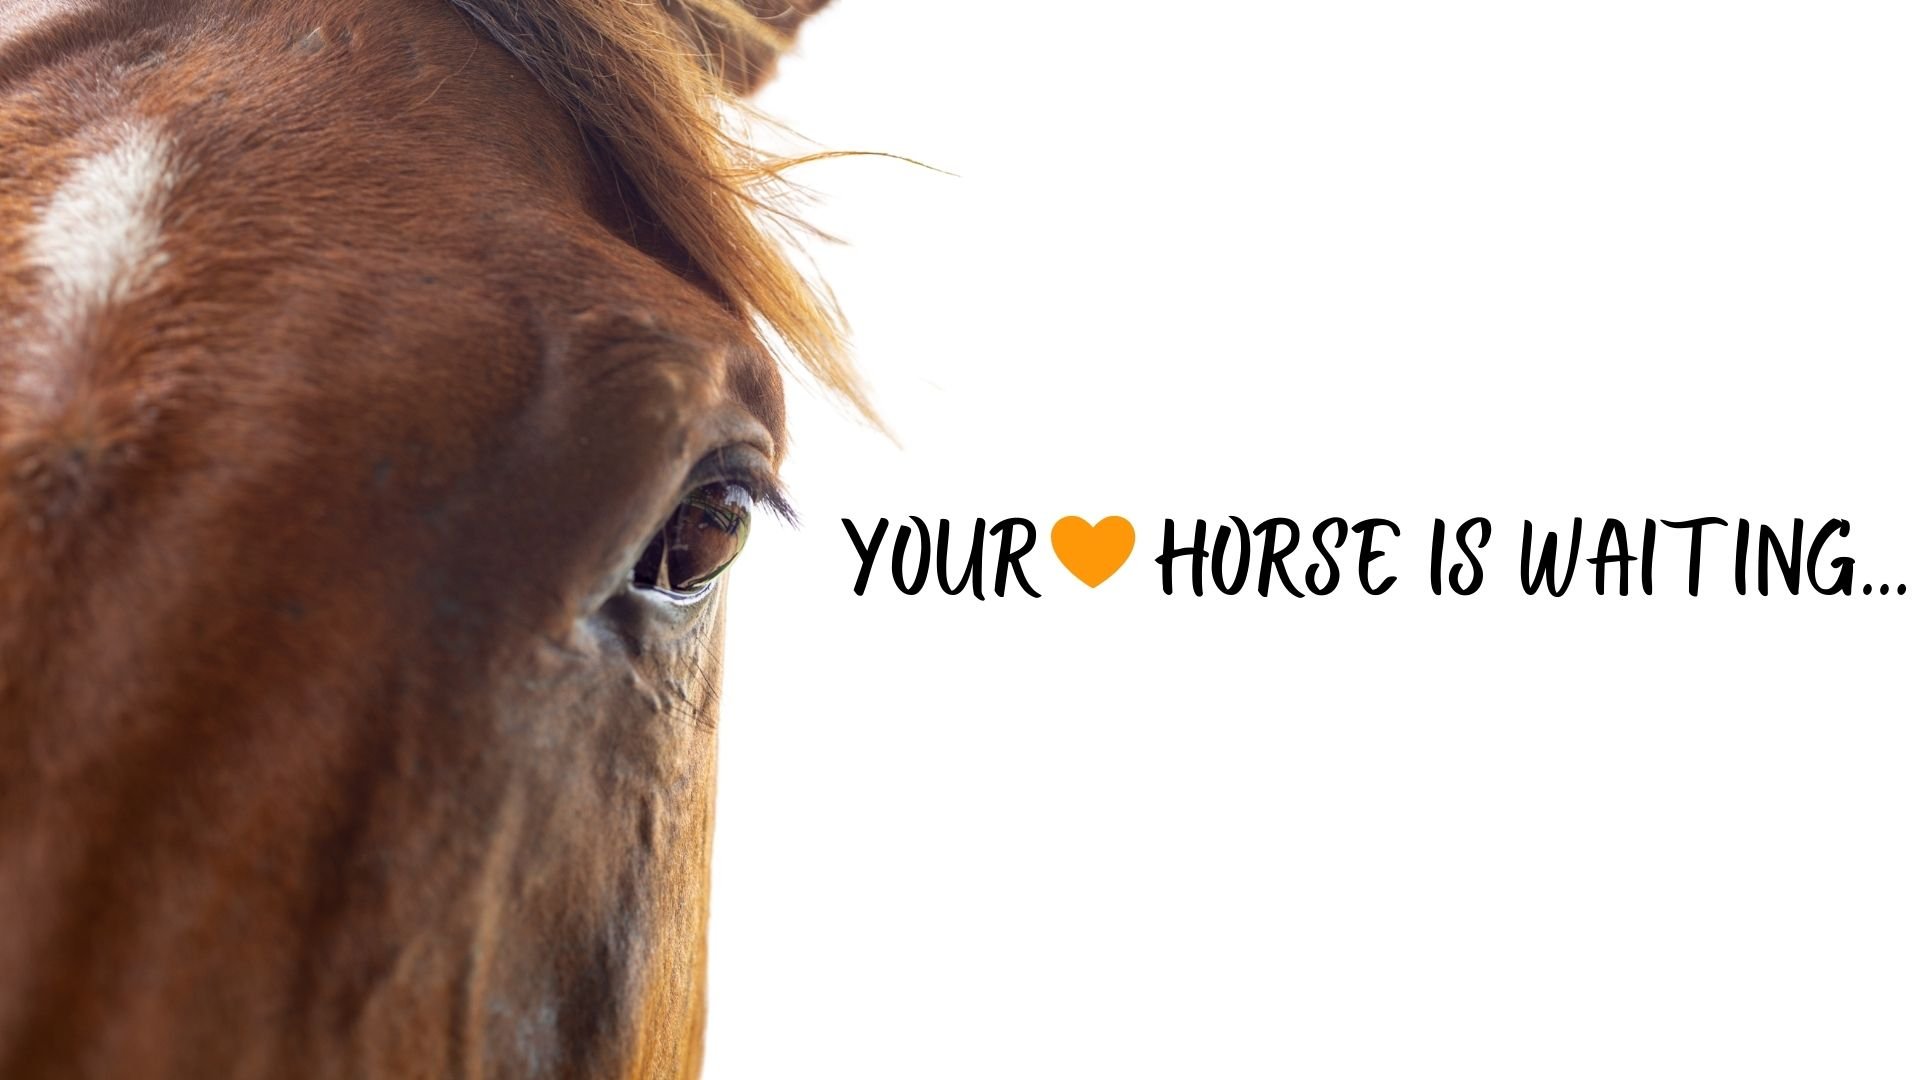 Your Heart Horse is Waiting for you!